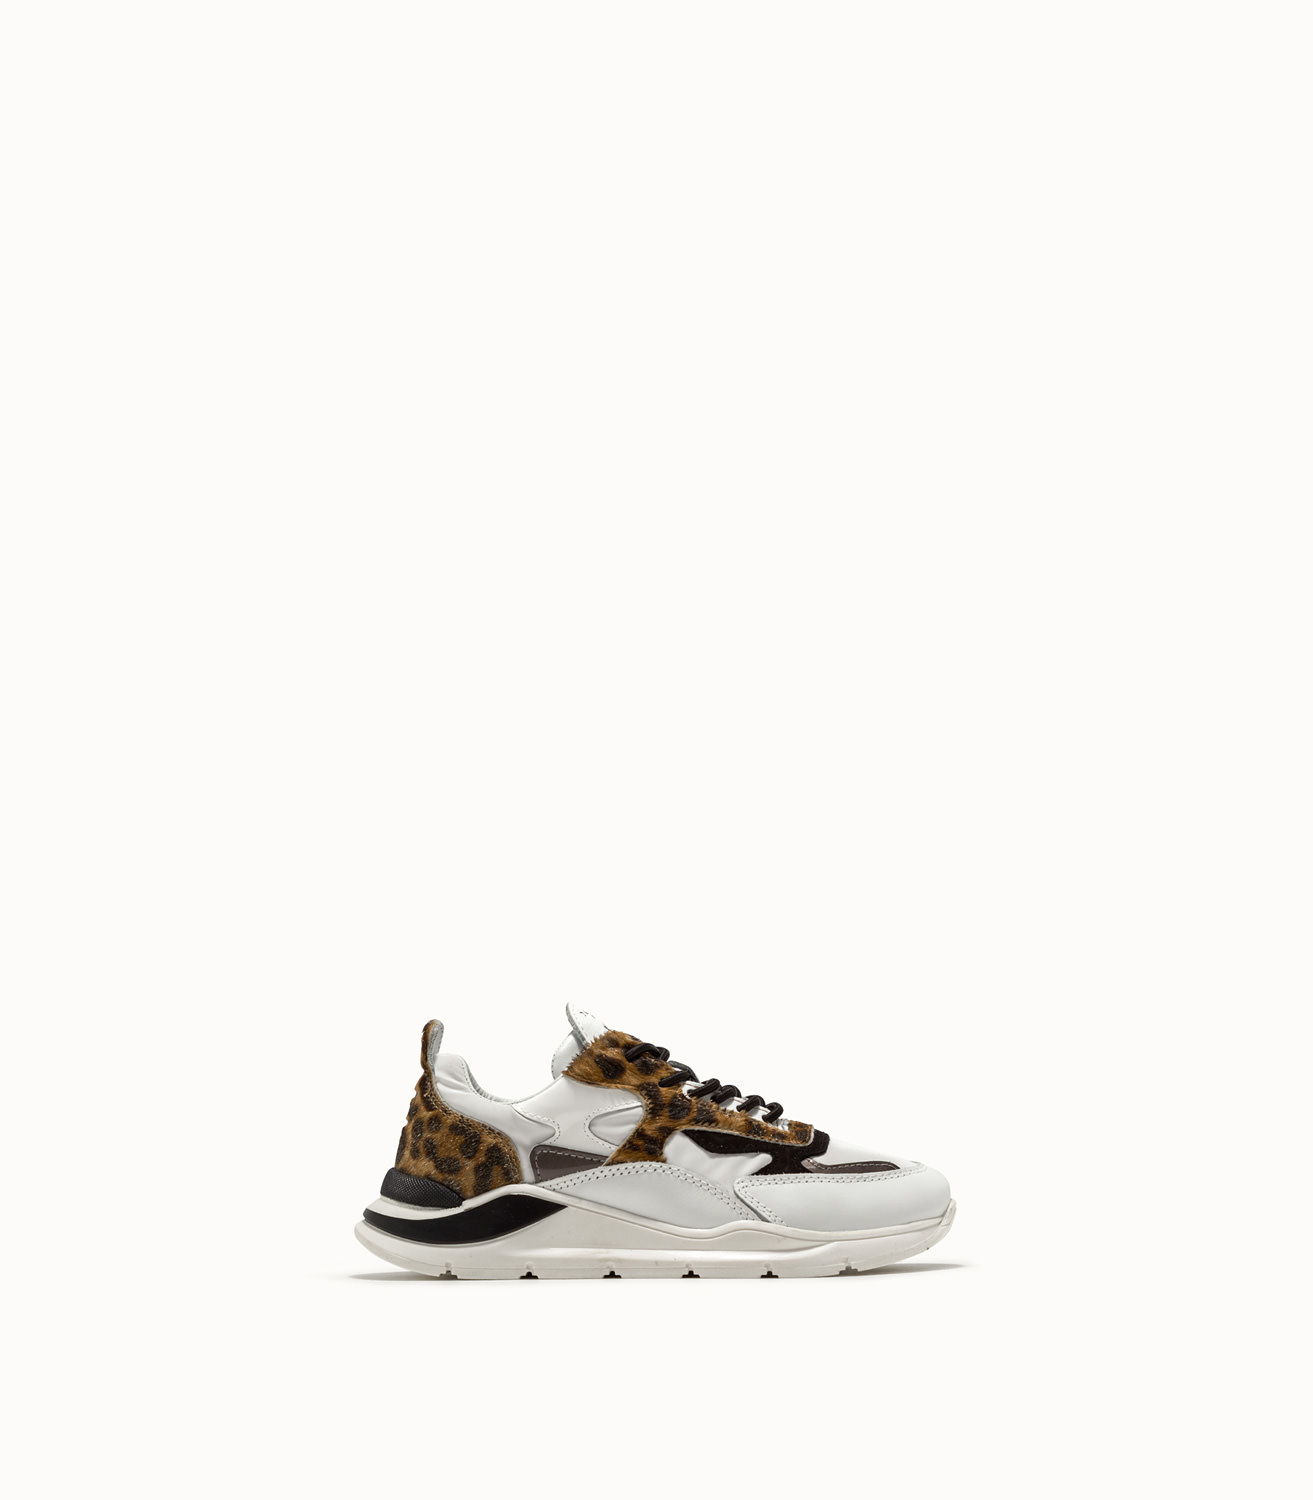 D.A.T.E. FUGA 2 ANIMALIER LEOPARD SNEAKERS | Playground